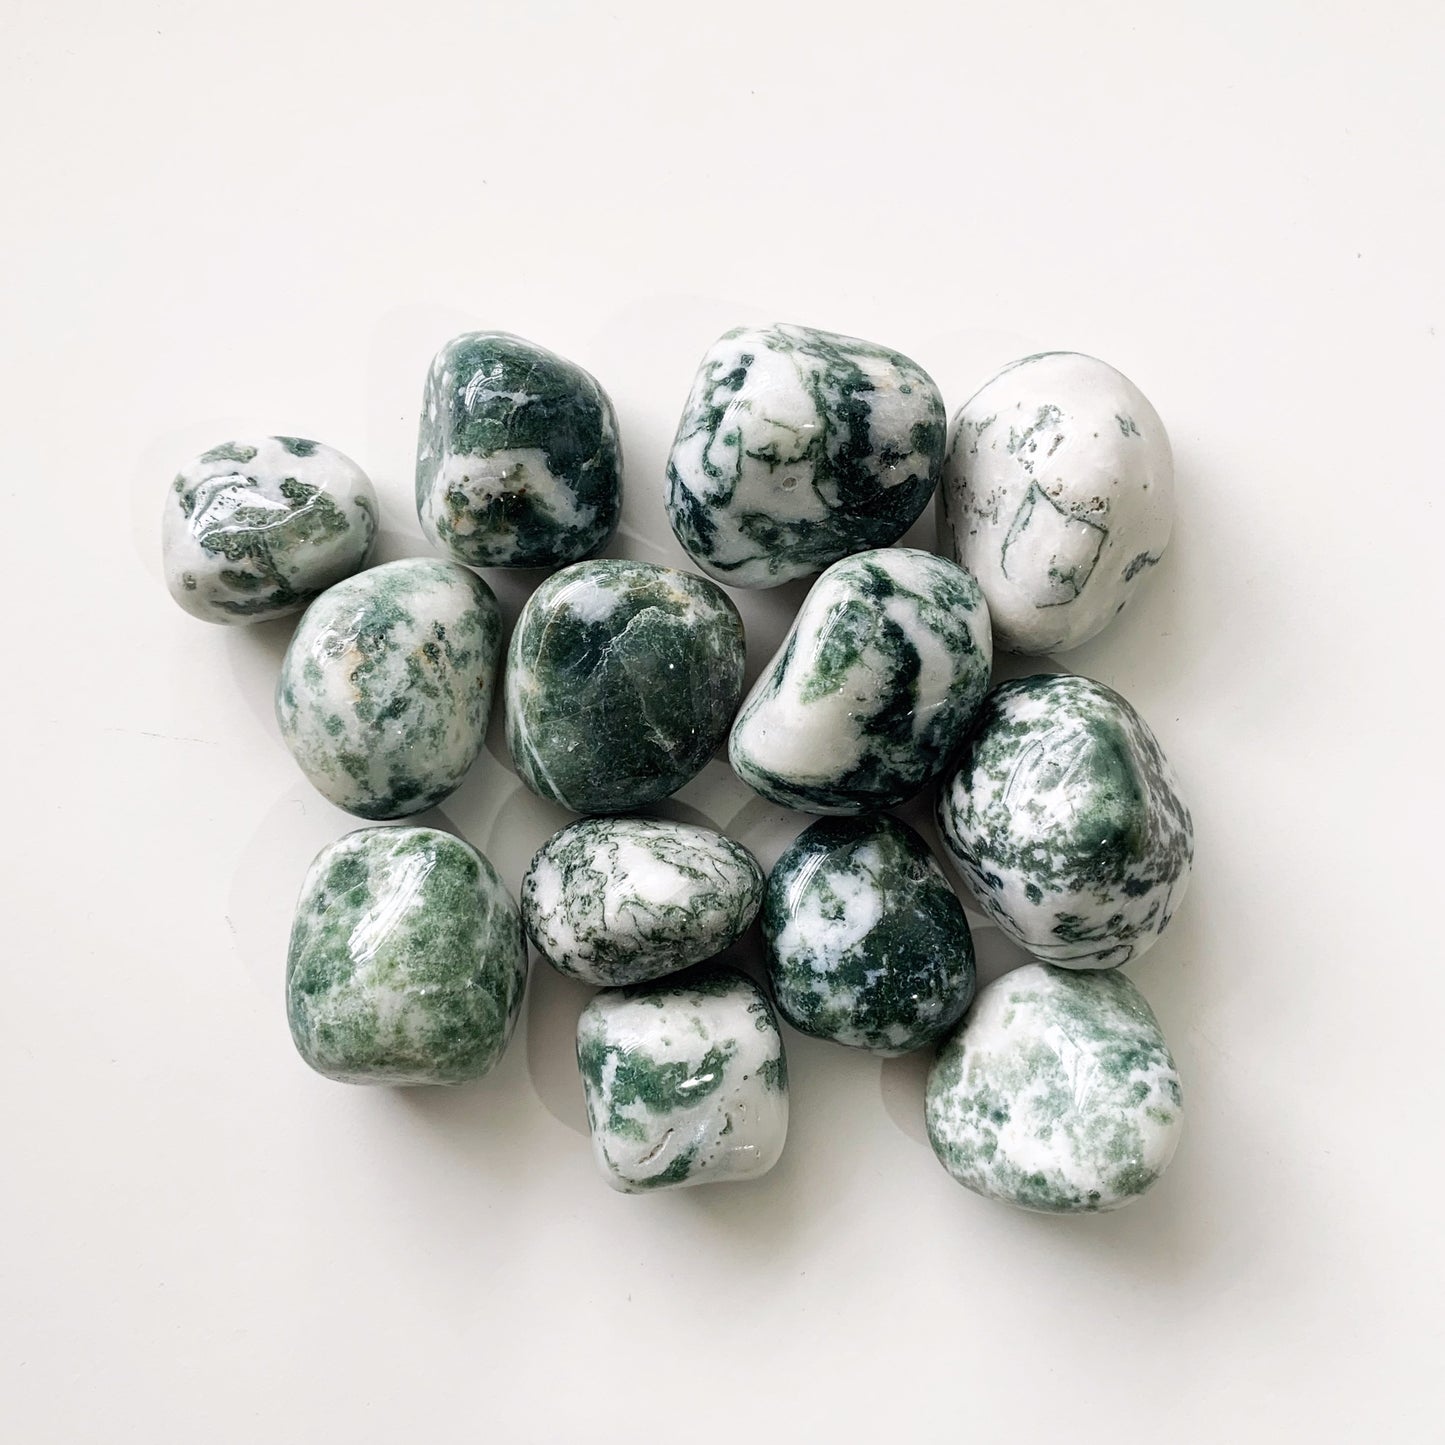 Tree Agate is a stone of inner peace. Gentle Tree Agate calms nerves, and can be combined with Clear Quartz to deepen meditation and prayer. ... Tree Agate is a healer of geopathic stress; by emitting its calming and centering energies into the environment.   Listing 1 stone.